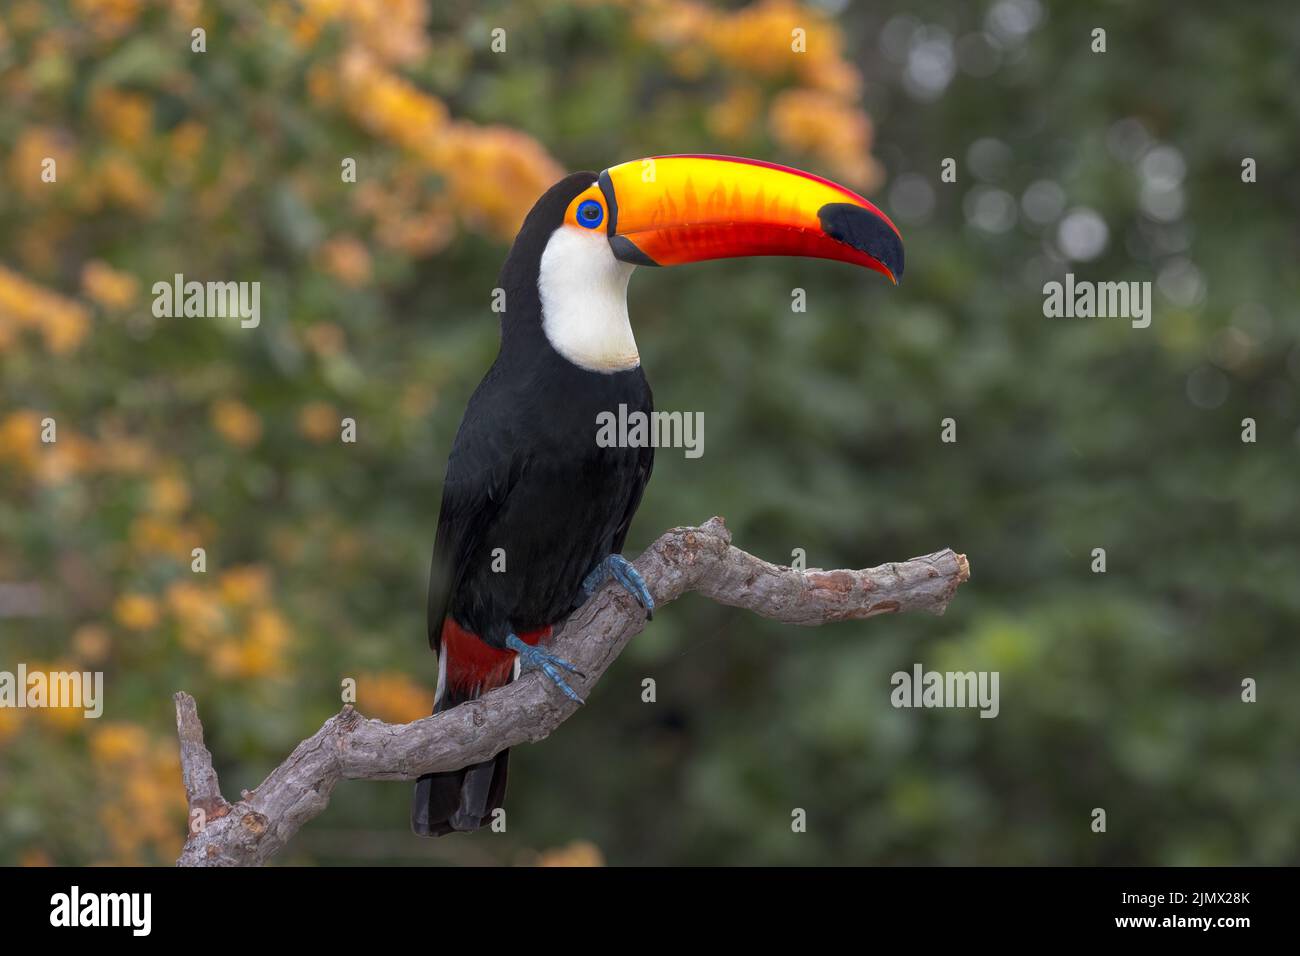 A Toco Toucan (Ramphastos toco), the largest of over 40 different species of Toucan, perched on a branch in the Pantanal of Brazil. Stock Photo